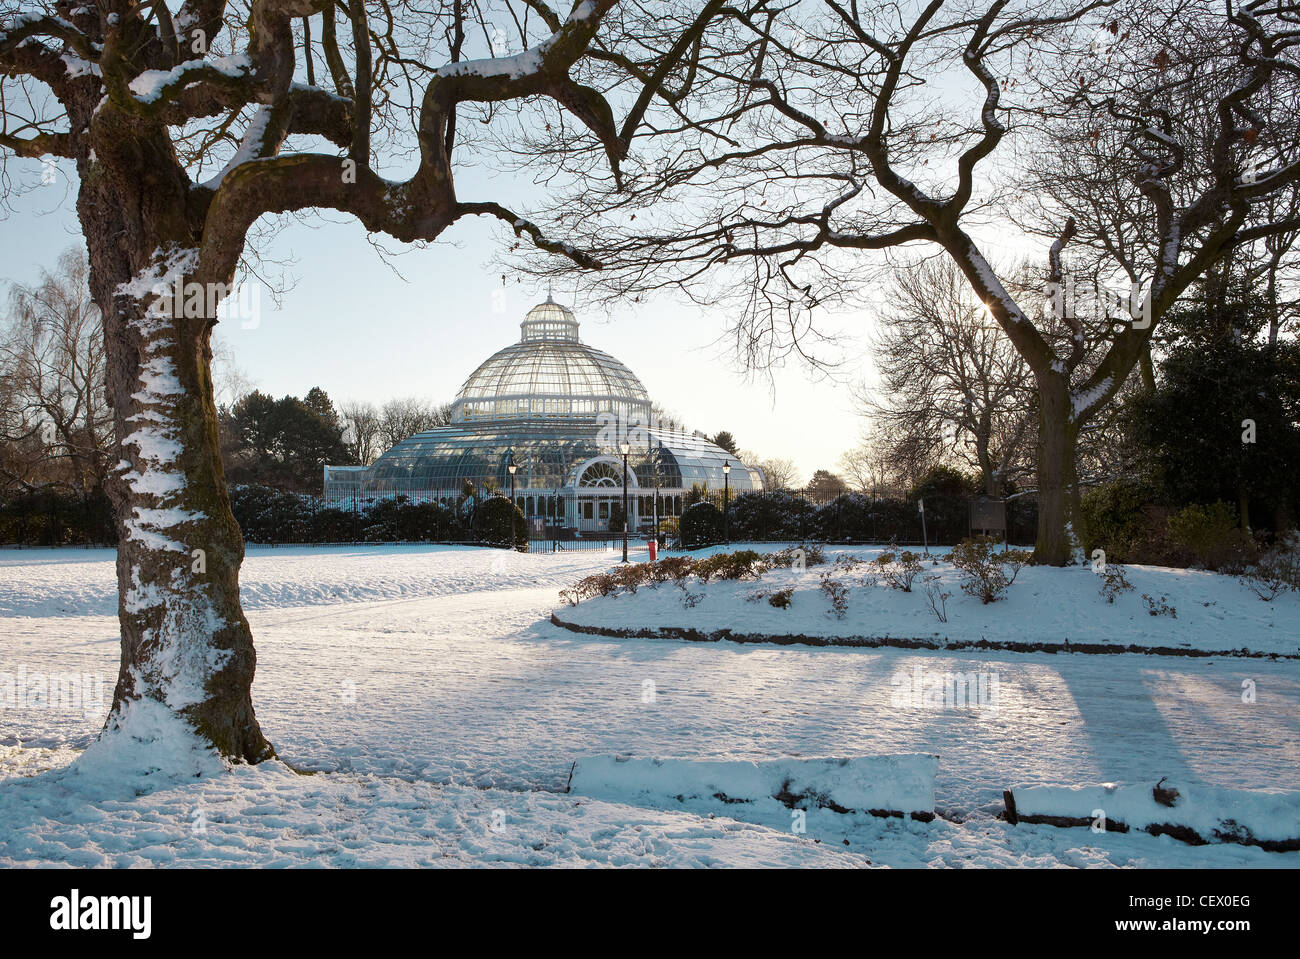 The glass palm house at Sefton Park, Liverpool , North West England, on a snowy winter day Stock Photo